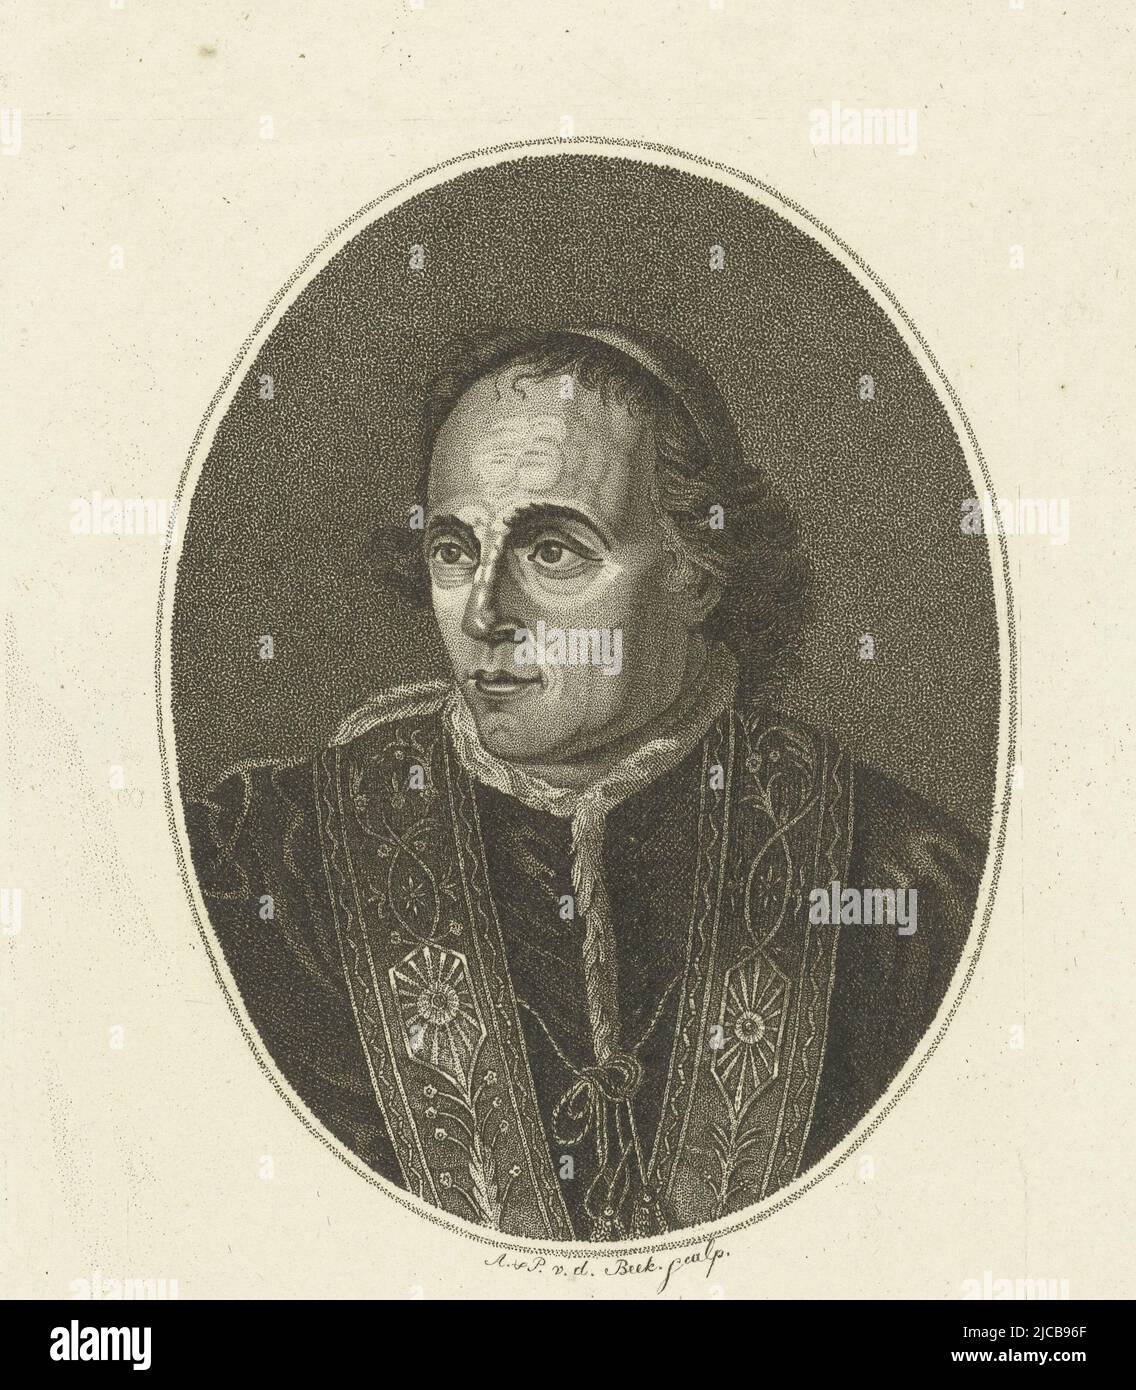 Portrait of Pope Pius VII Pius sept pont max , print maker: Antonie en Pieter van der Beek, (mentioned on object), publisher: J.W. Robyns, (mentioned on object), 1795 - 1821, paper, etching, h 221 mm × w 136 mm Stock Photo